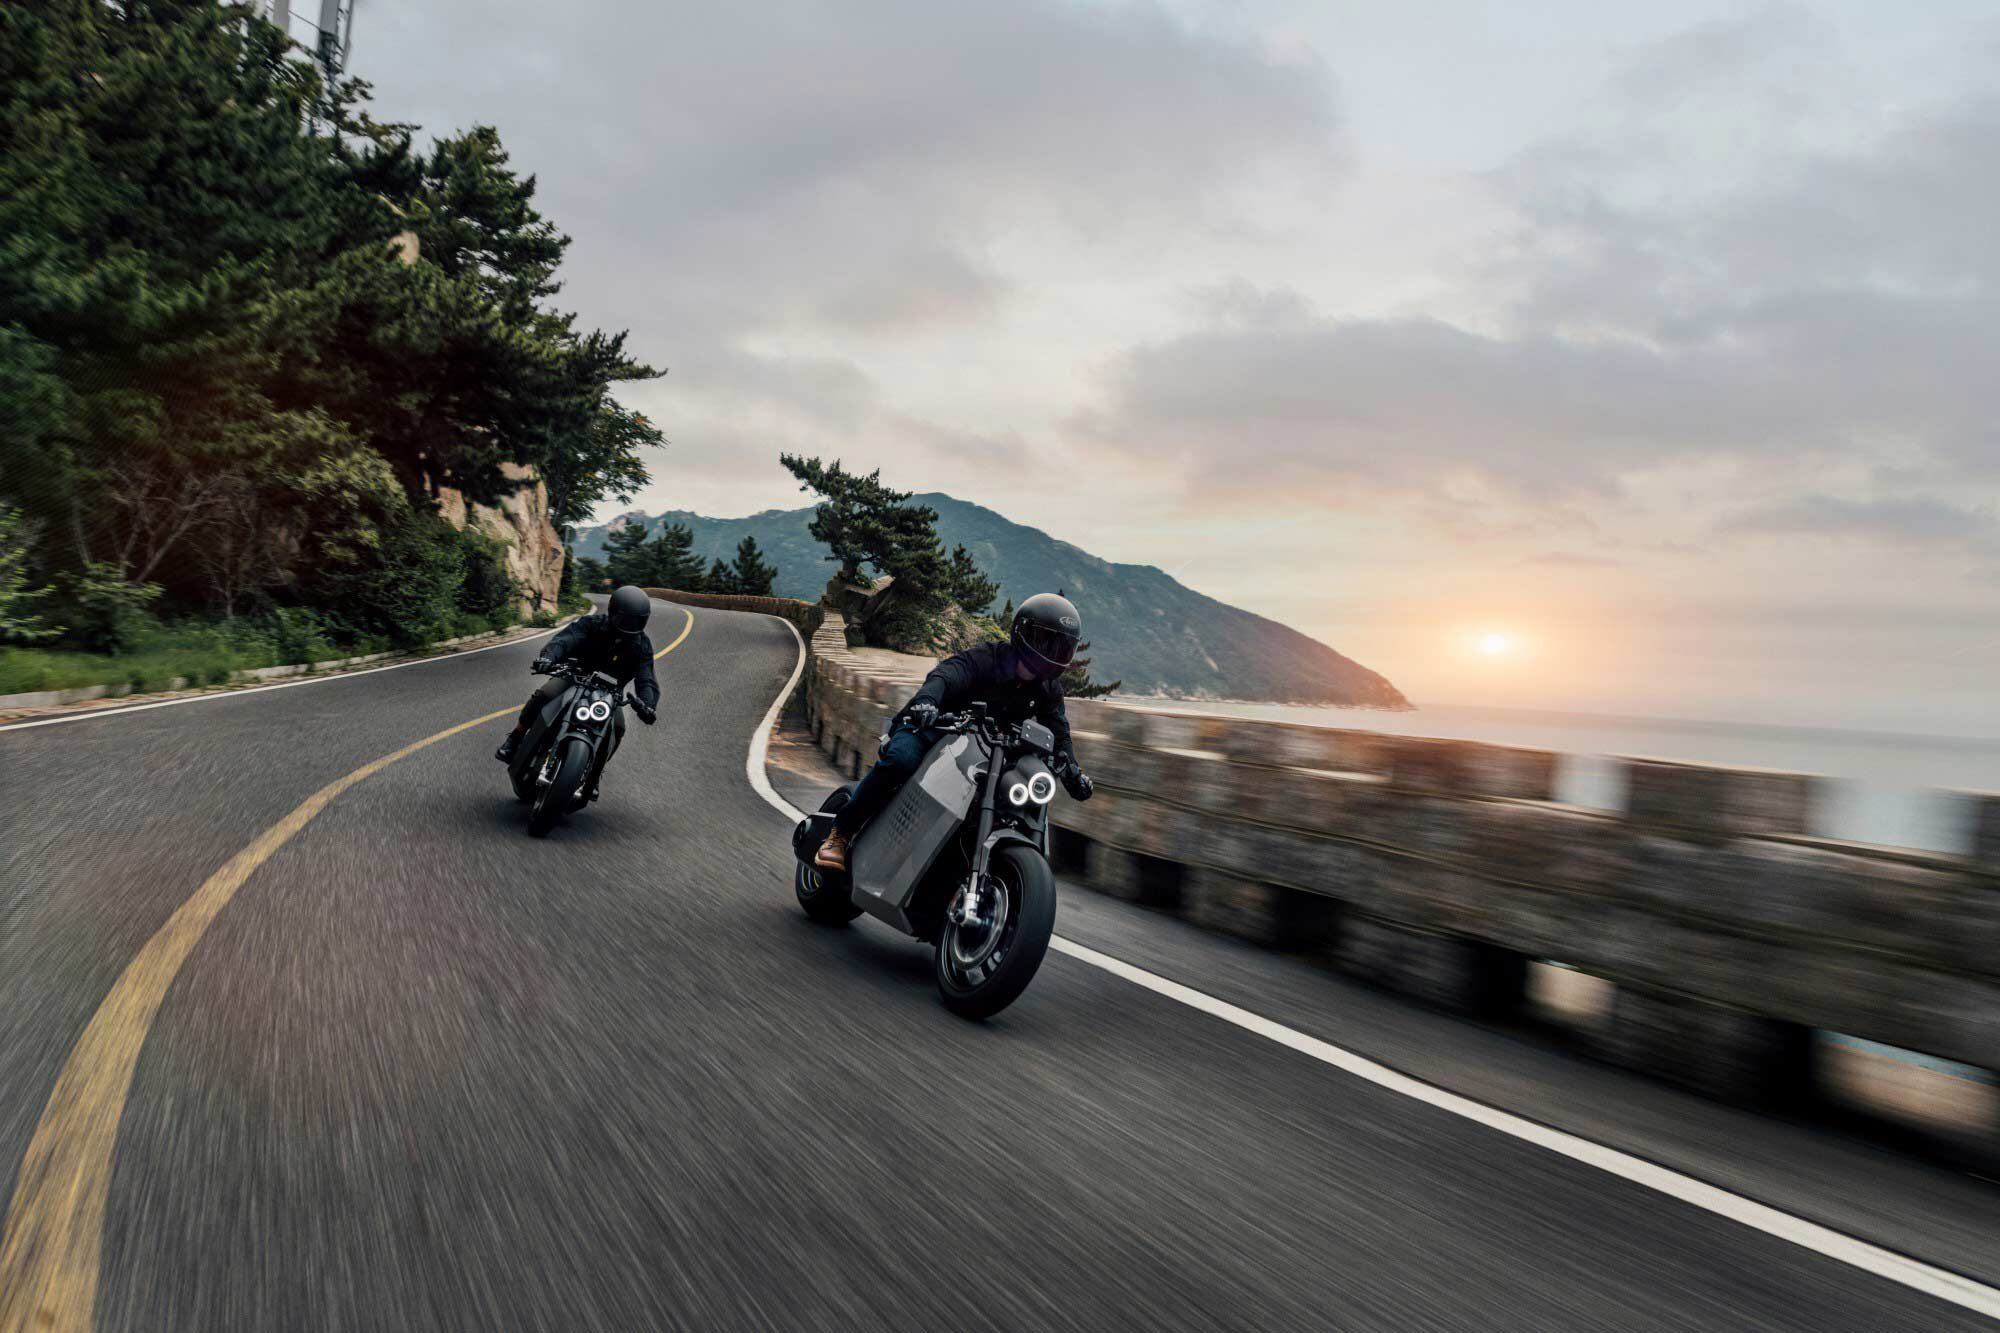 Davinci claims a range of 222 miles, which if accurate is at or near the top for available electric motorcycles.